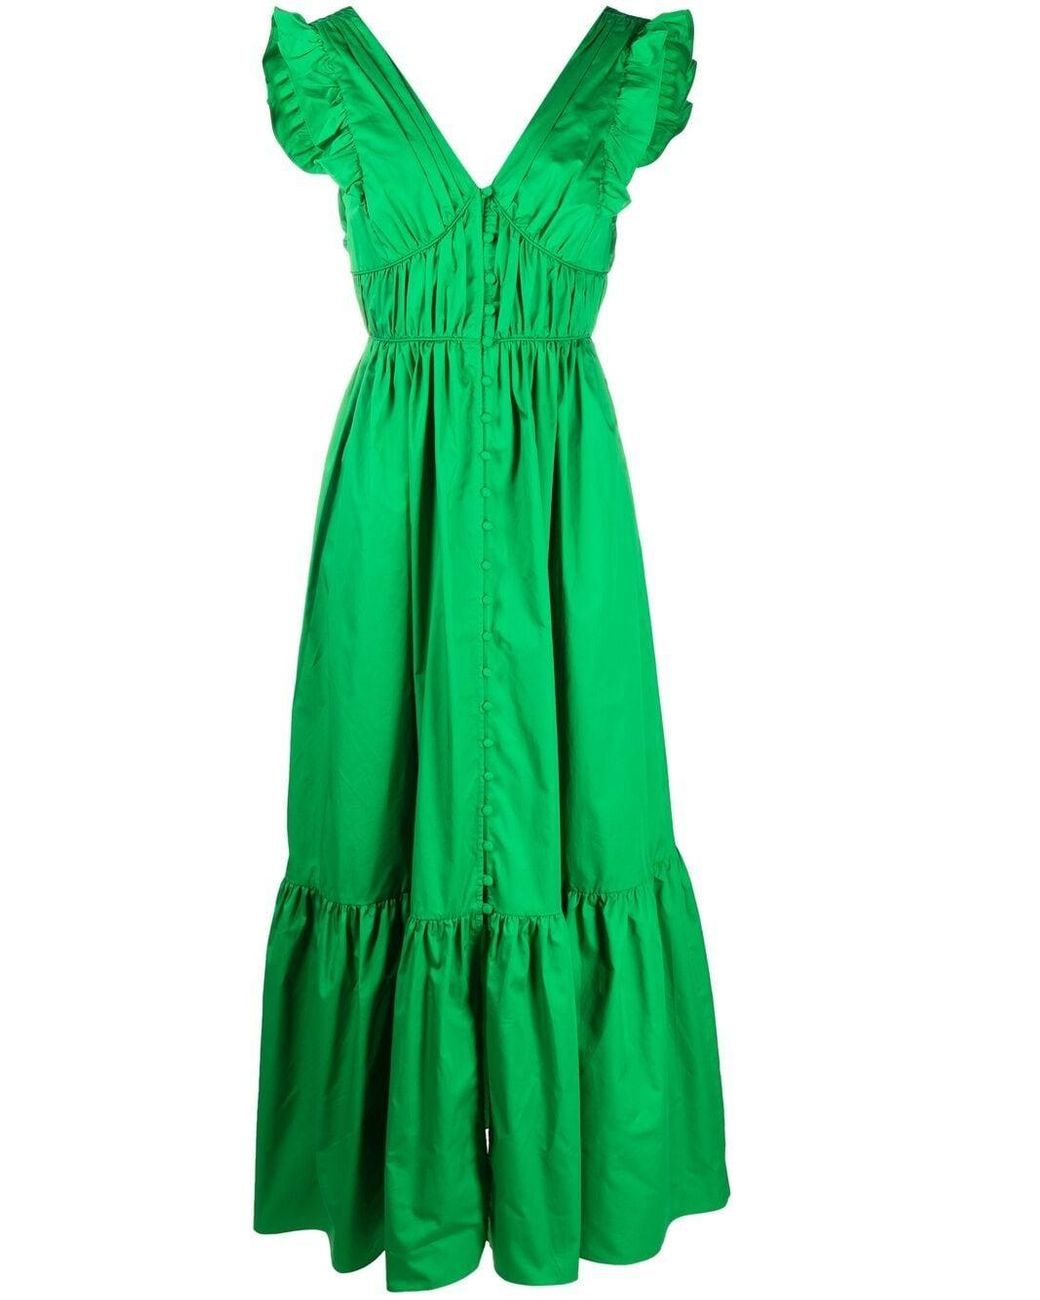 Self-Portrait Ruched-waist Ruffled Dress in Green - Save 40% - Lyst